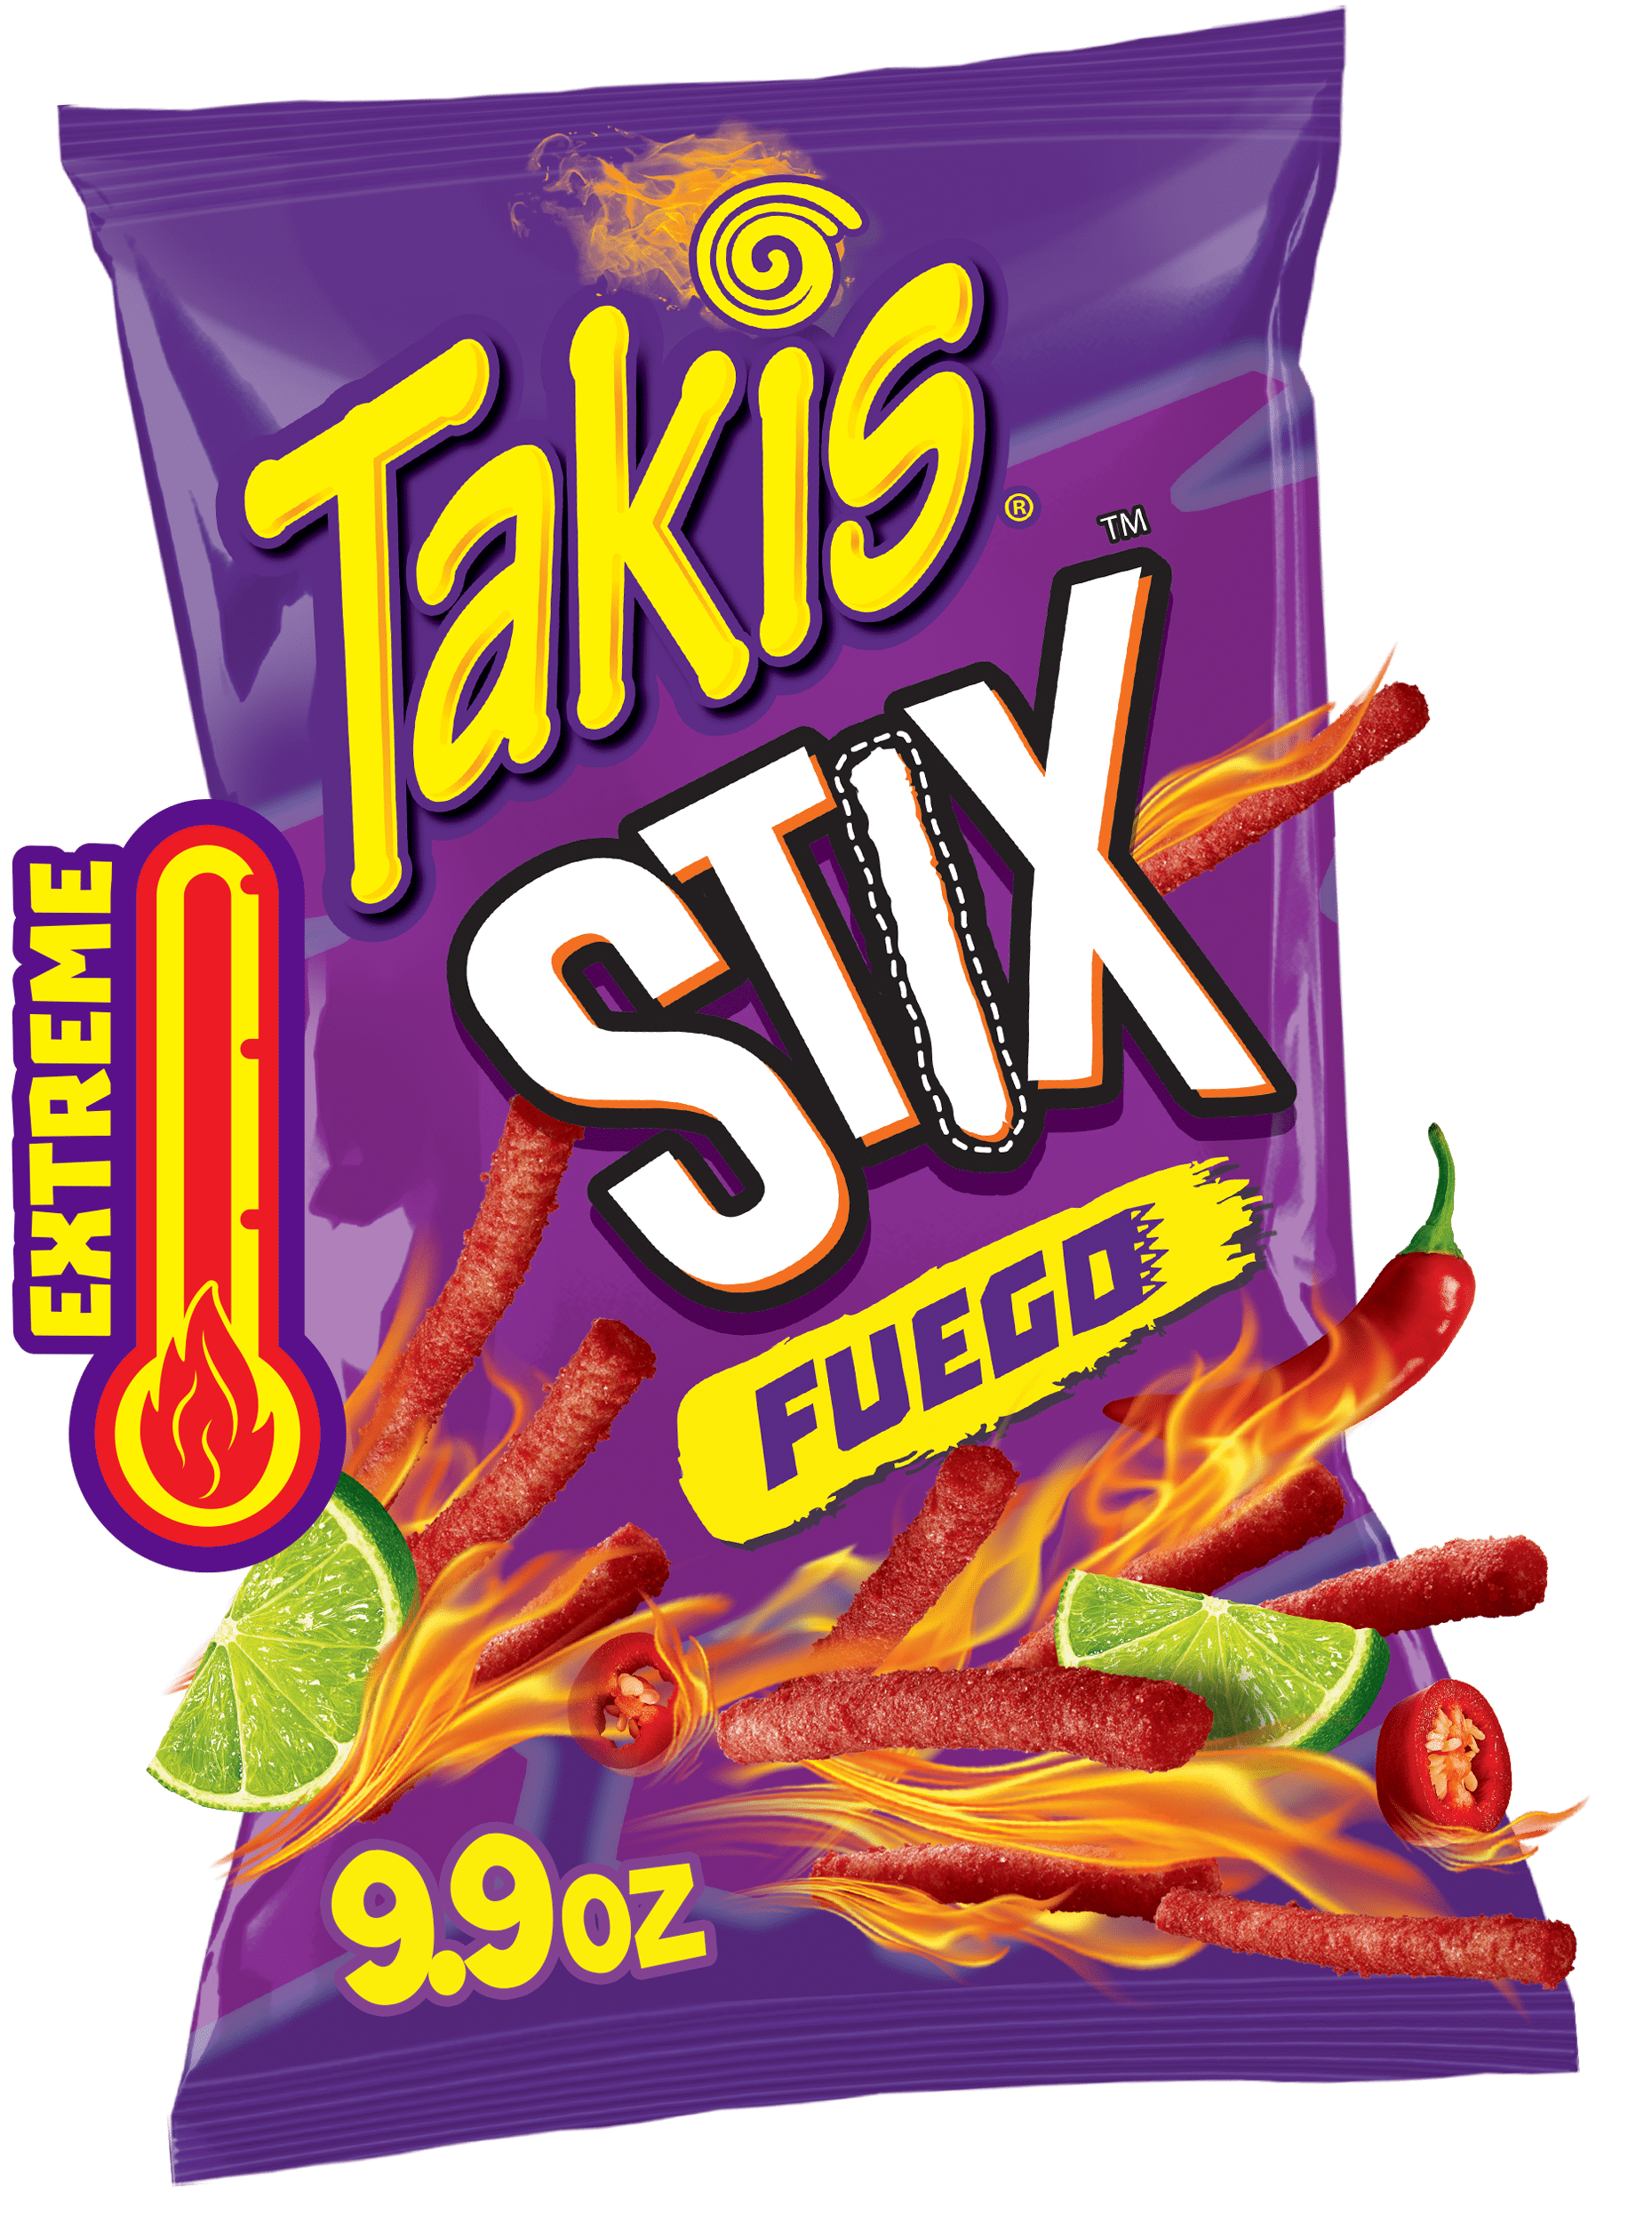 Takis Fuego Meat Stick 1oz - Hot Chili Pepper and Lime Flavor